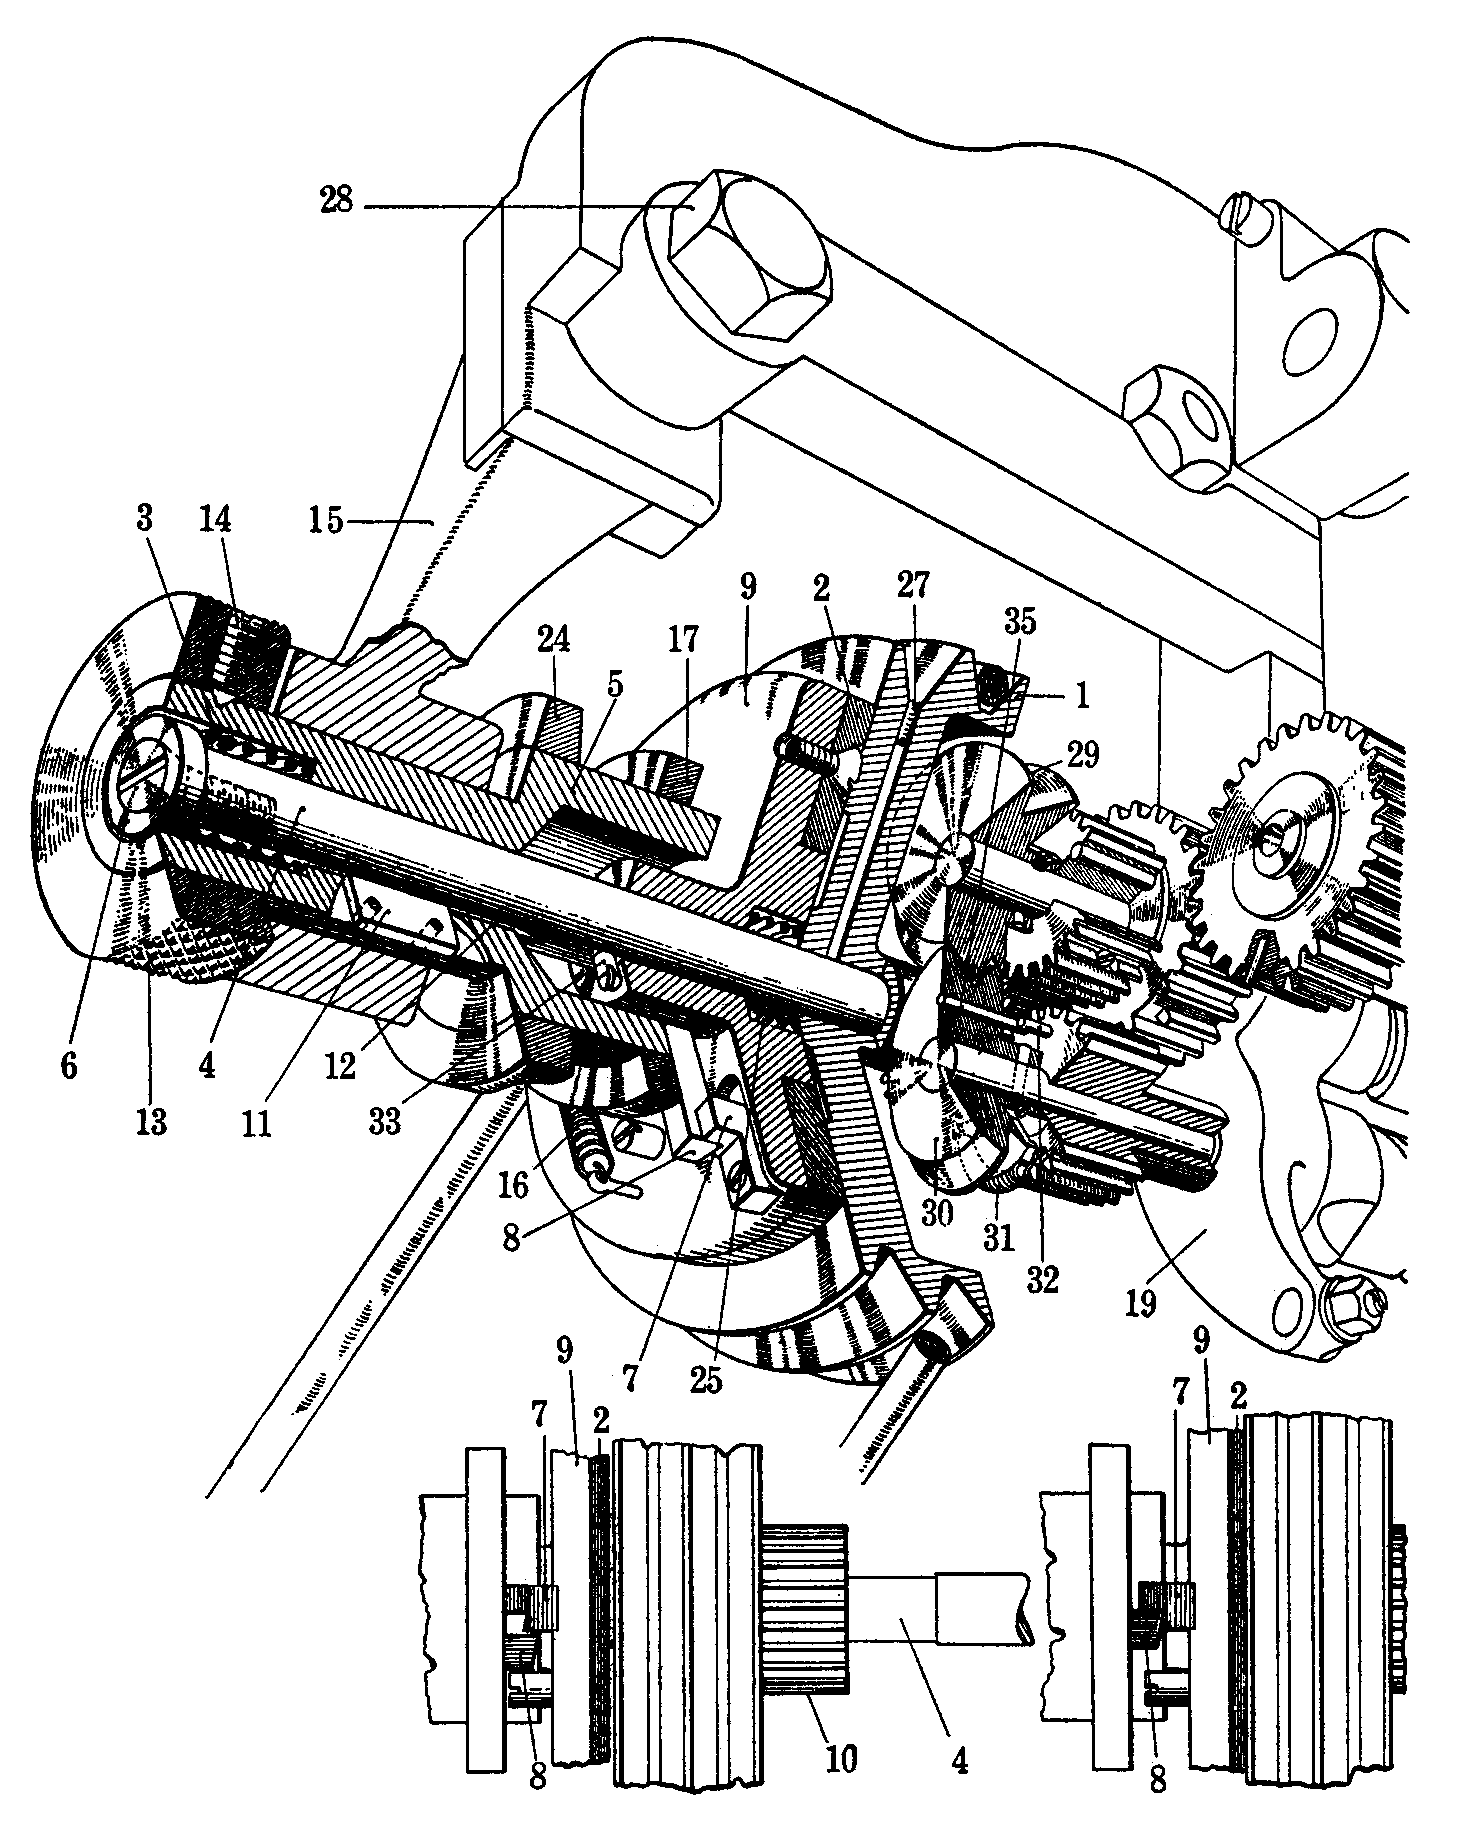 Line drawing of Distributor Clutch